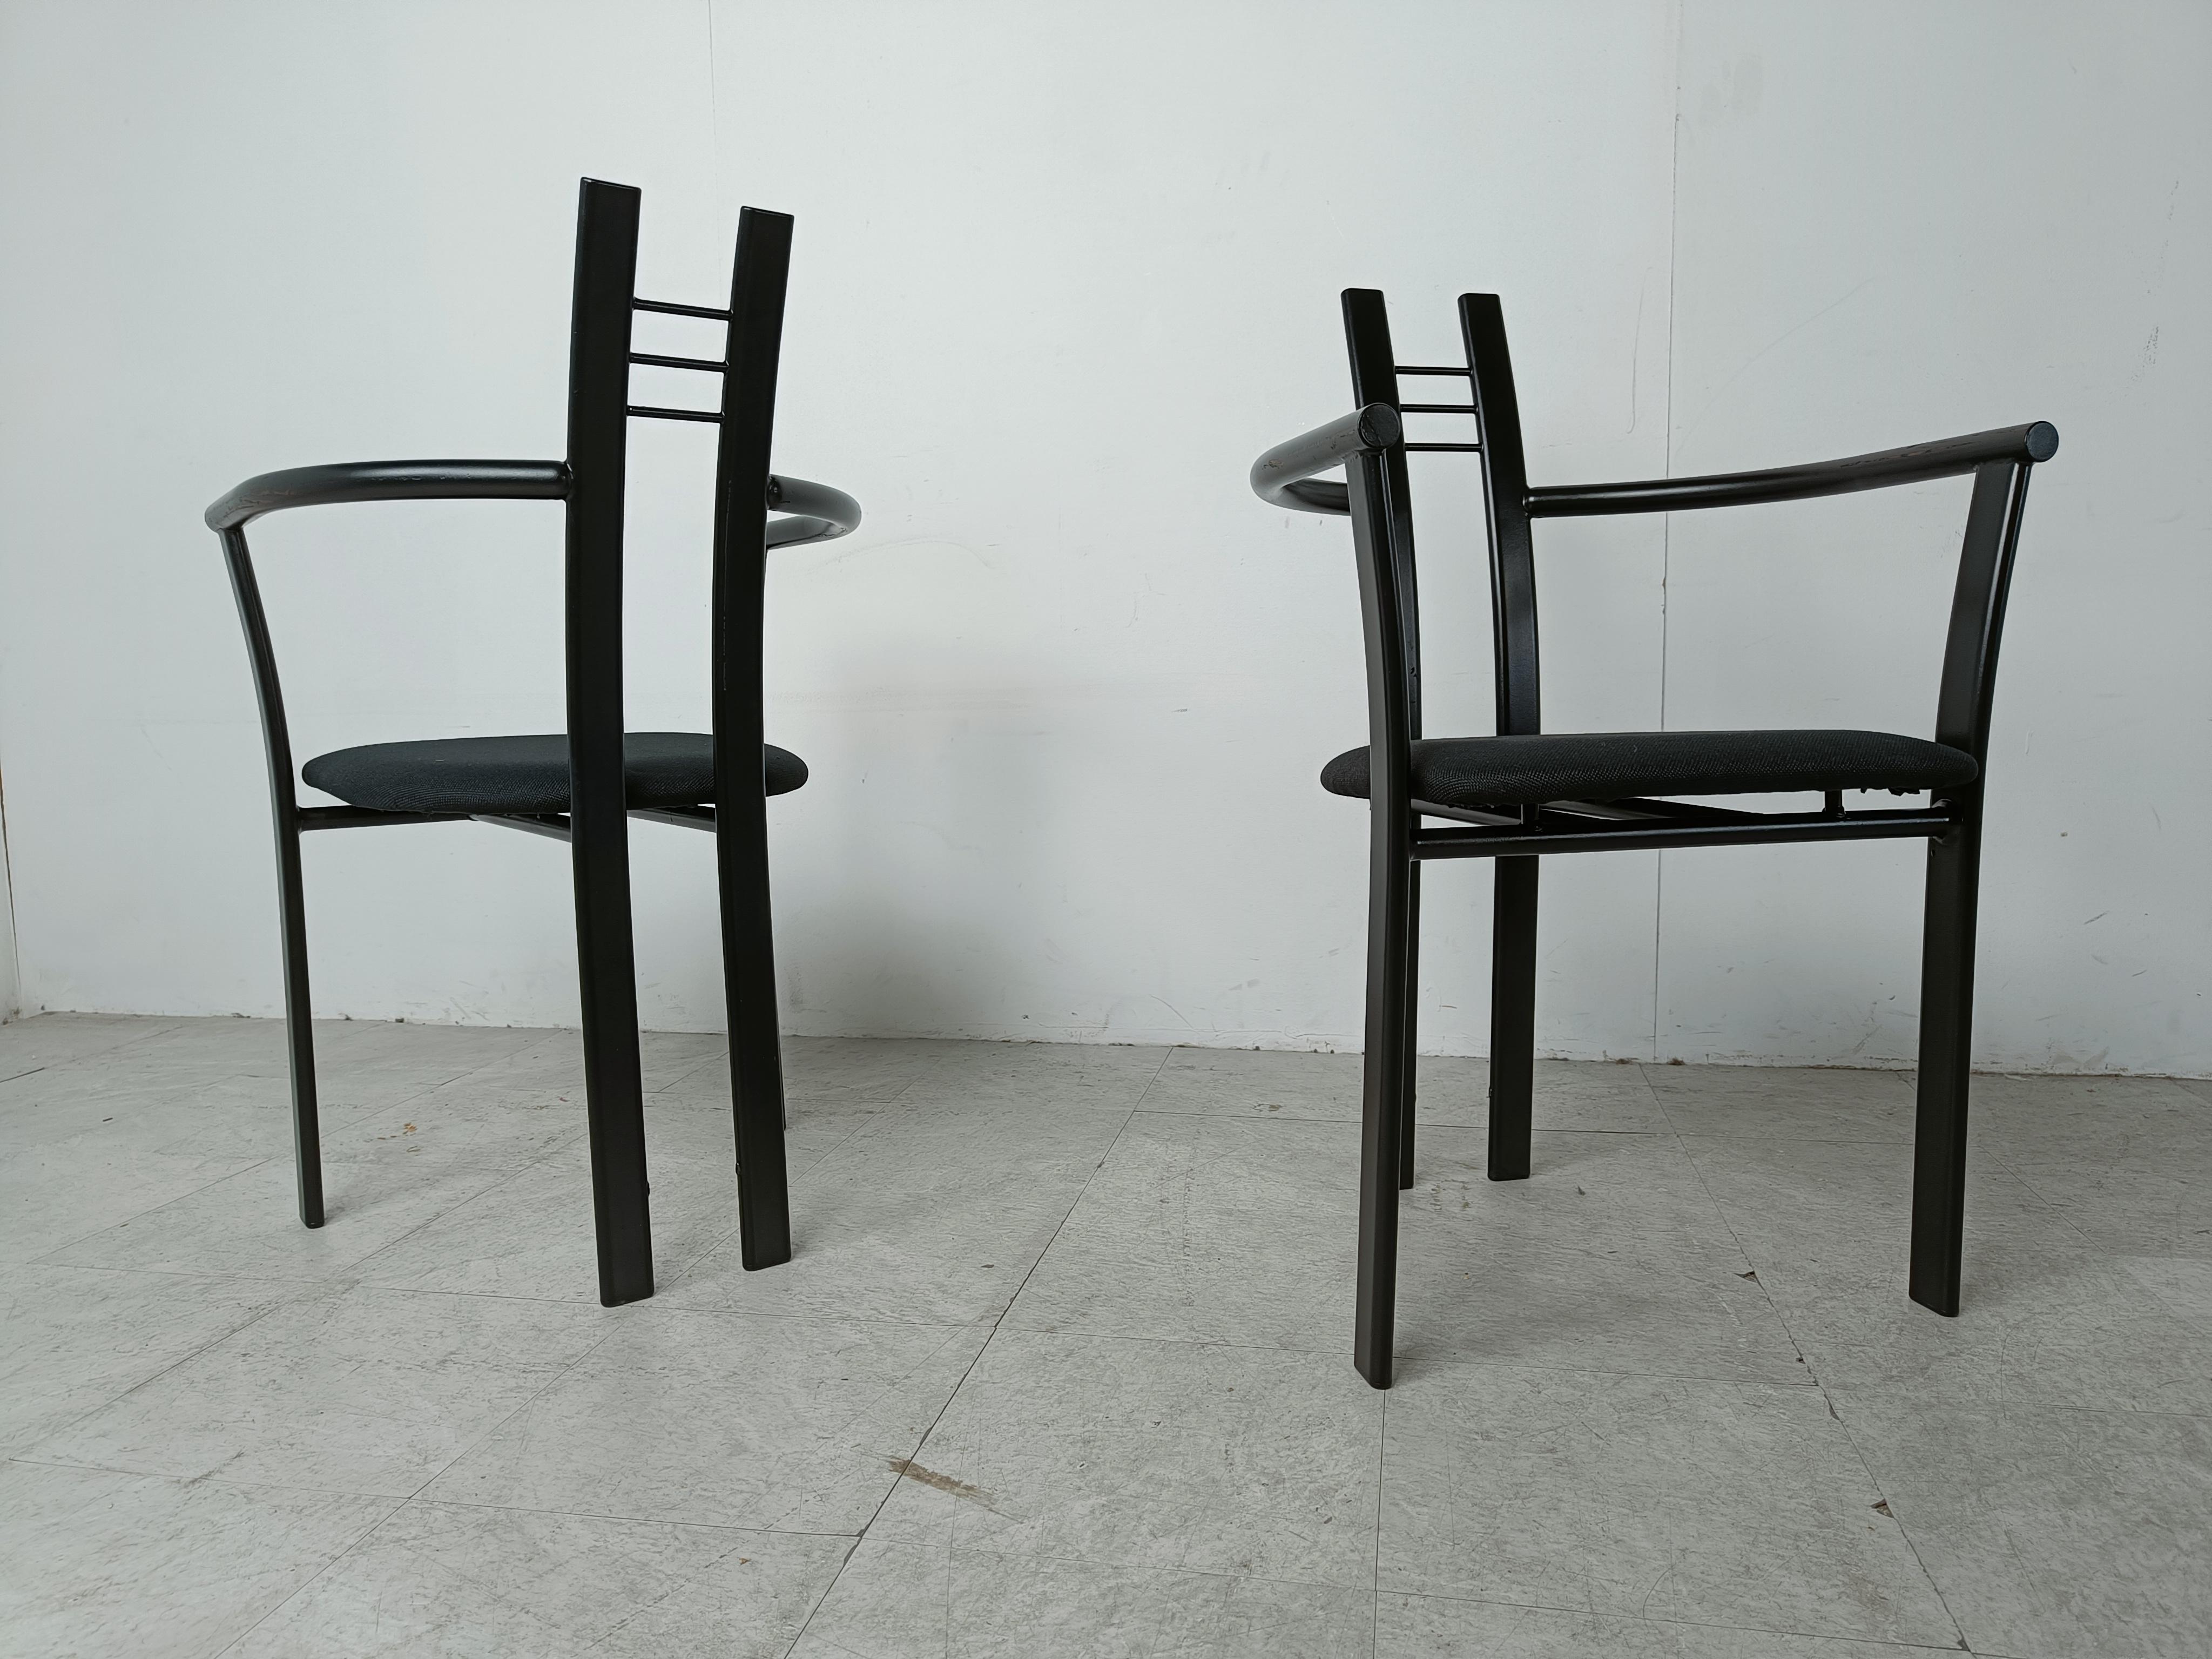 Set of 10 postmodern italian dining chairs with armrests.

Made out of black metal frames and black upholstered fabric seats.

Gorgeous timeless design.

Good condition

1980s - Italy

Dimensions:
Height: 90cm/35.43